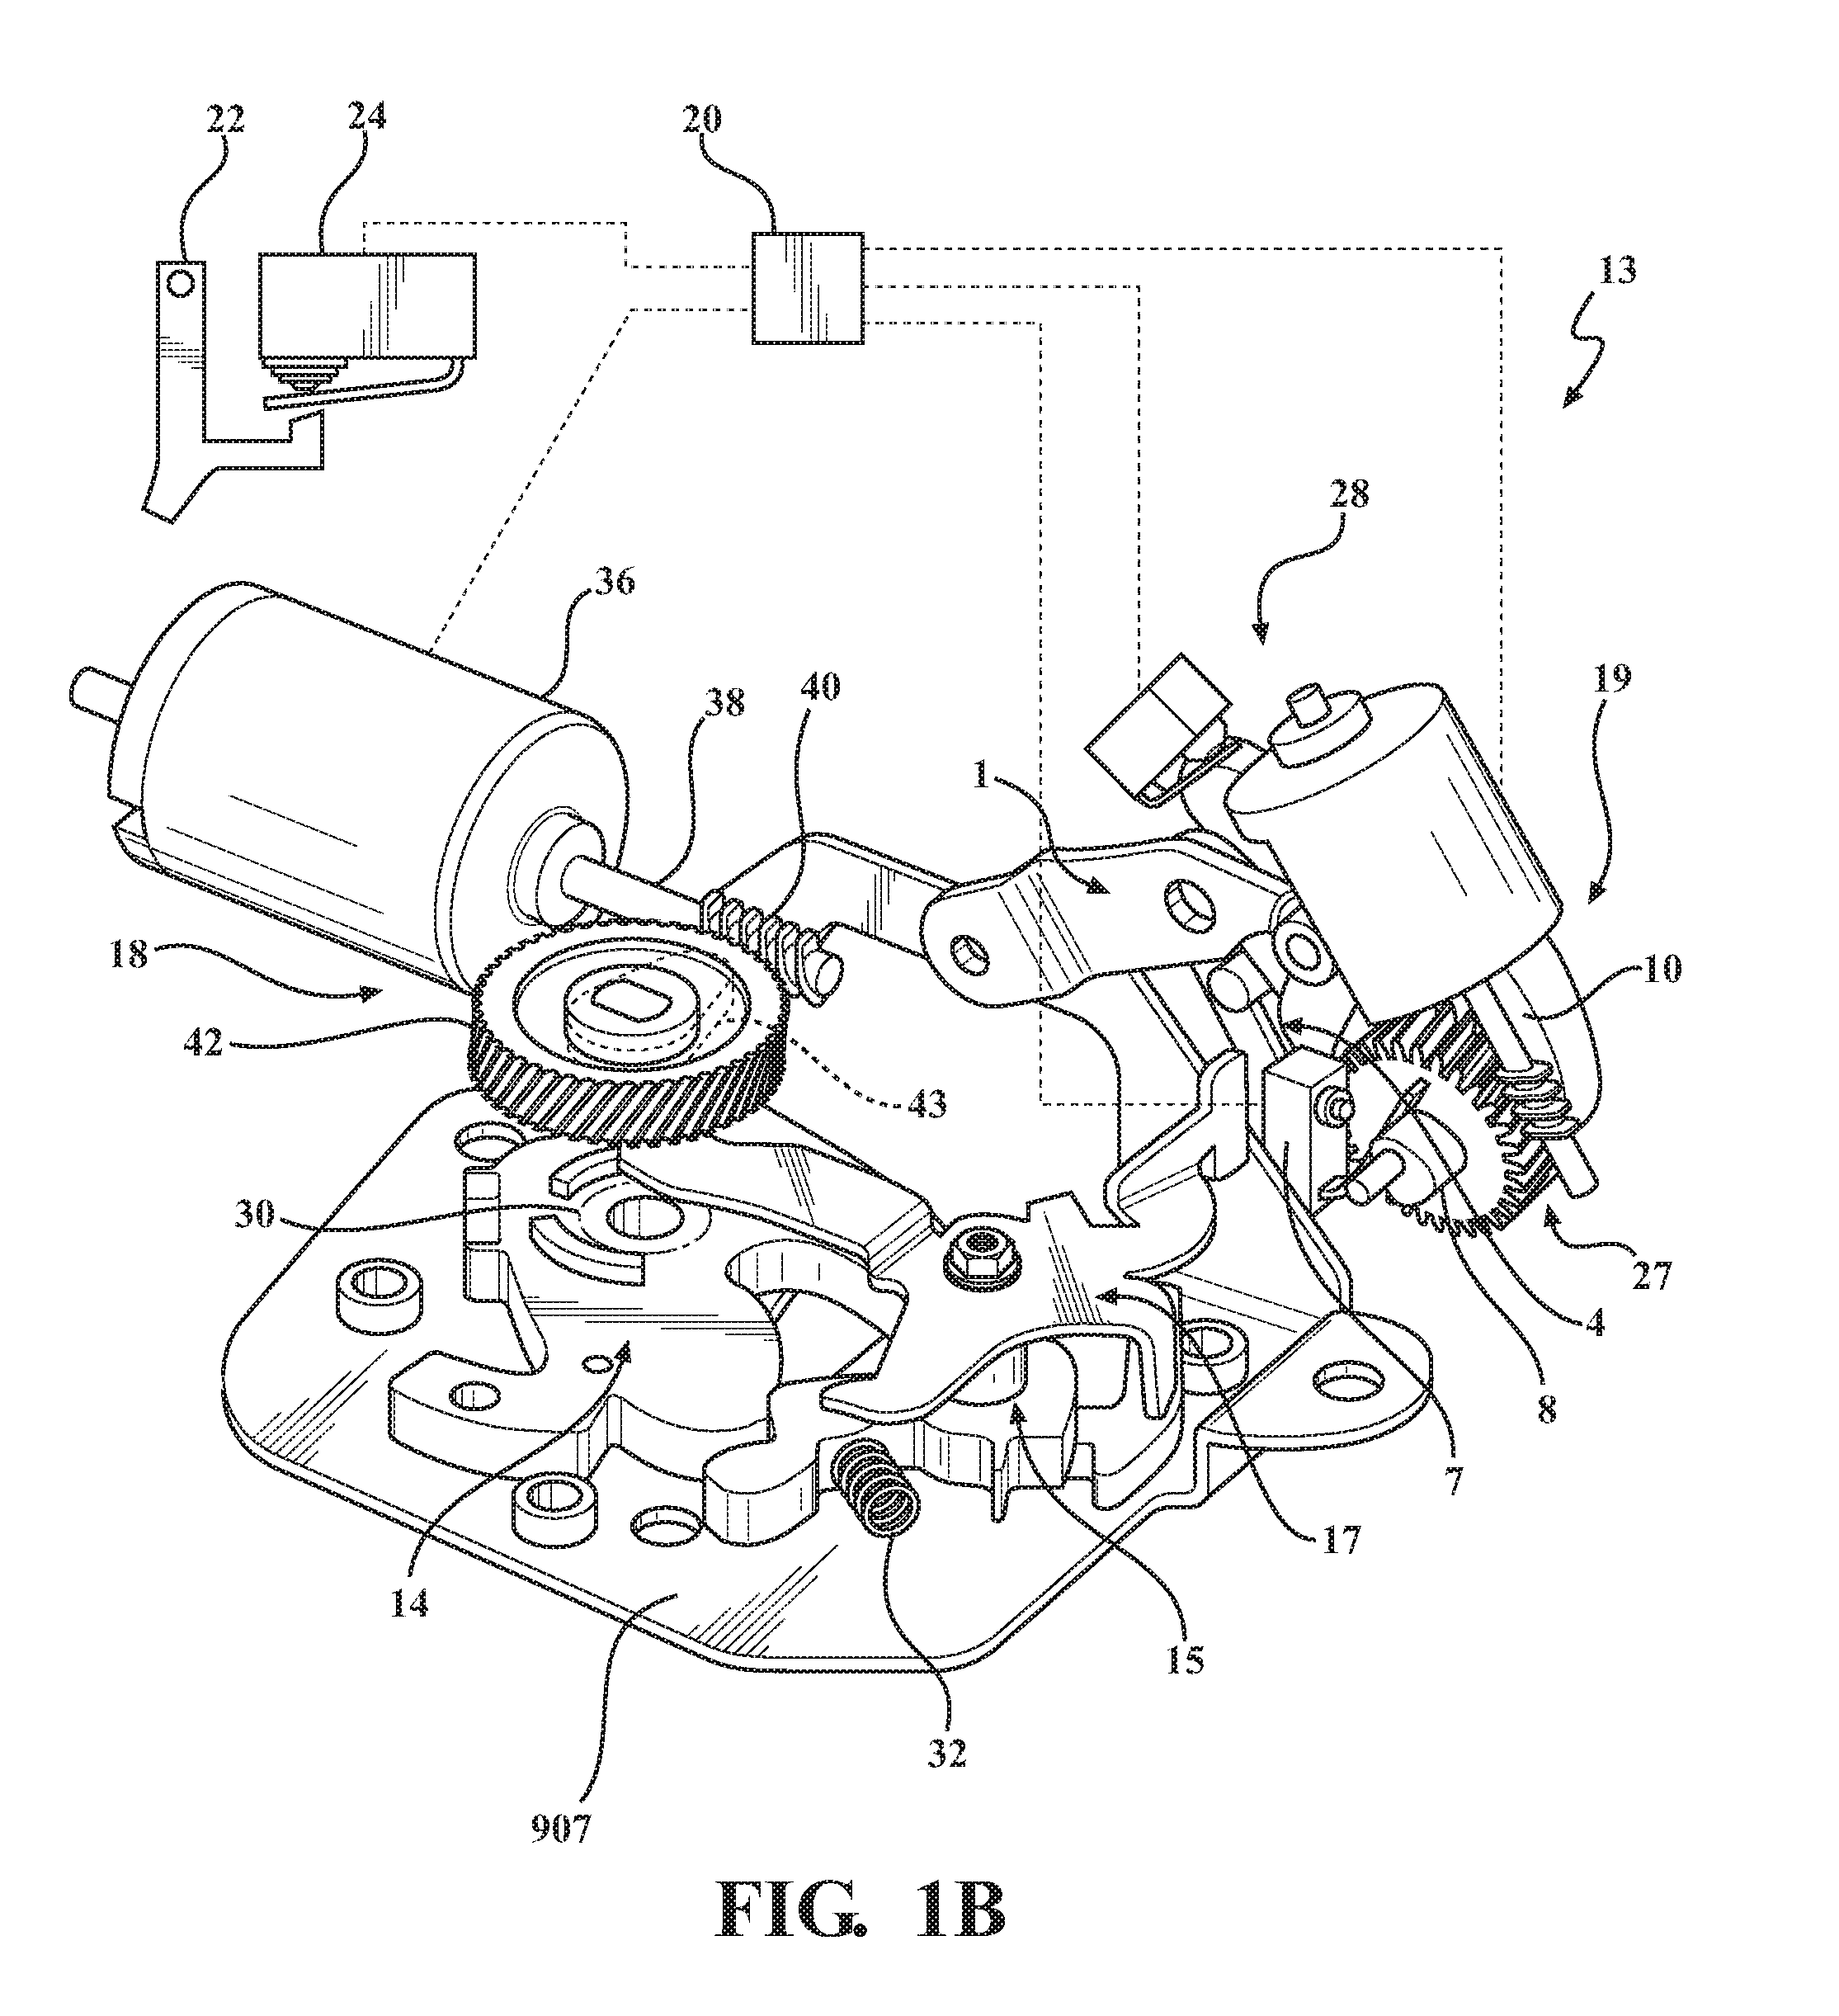 Key cylinder release mechanism for vehicle closure latches, latch assembly therewith and method of mechanically releasing a vehicle closure latch